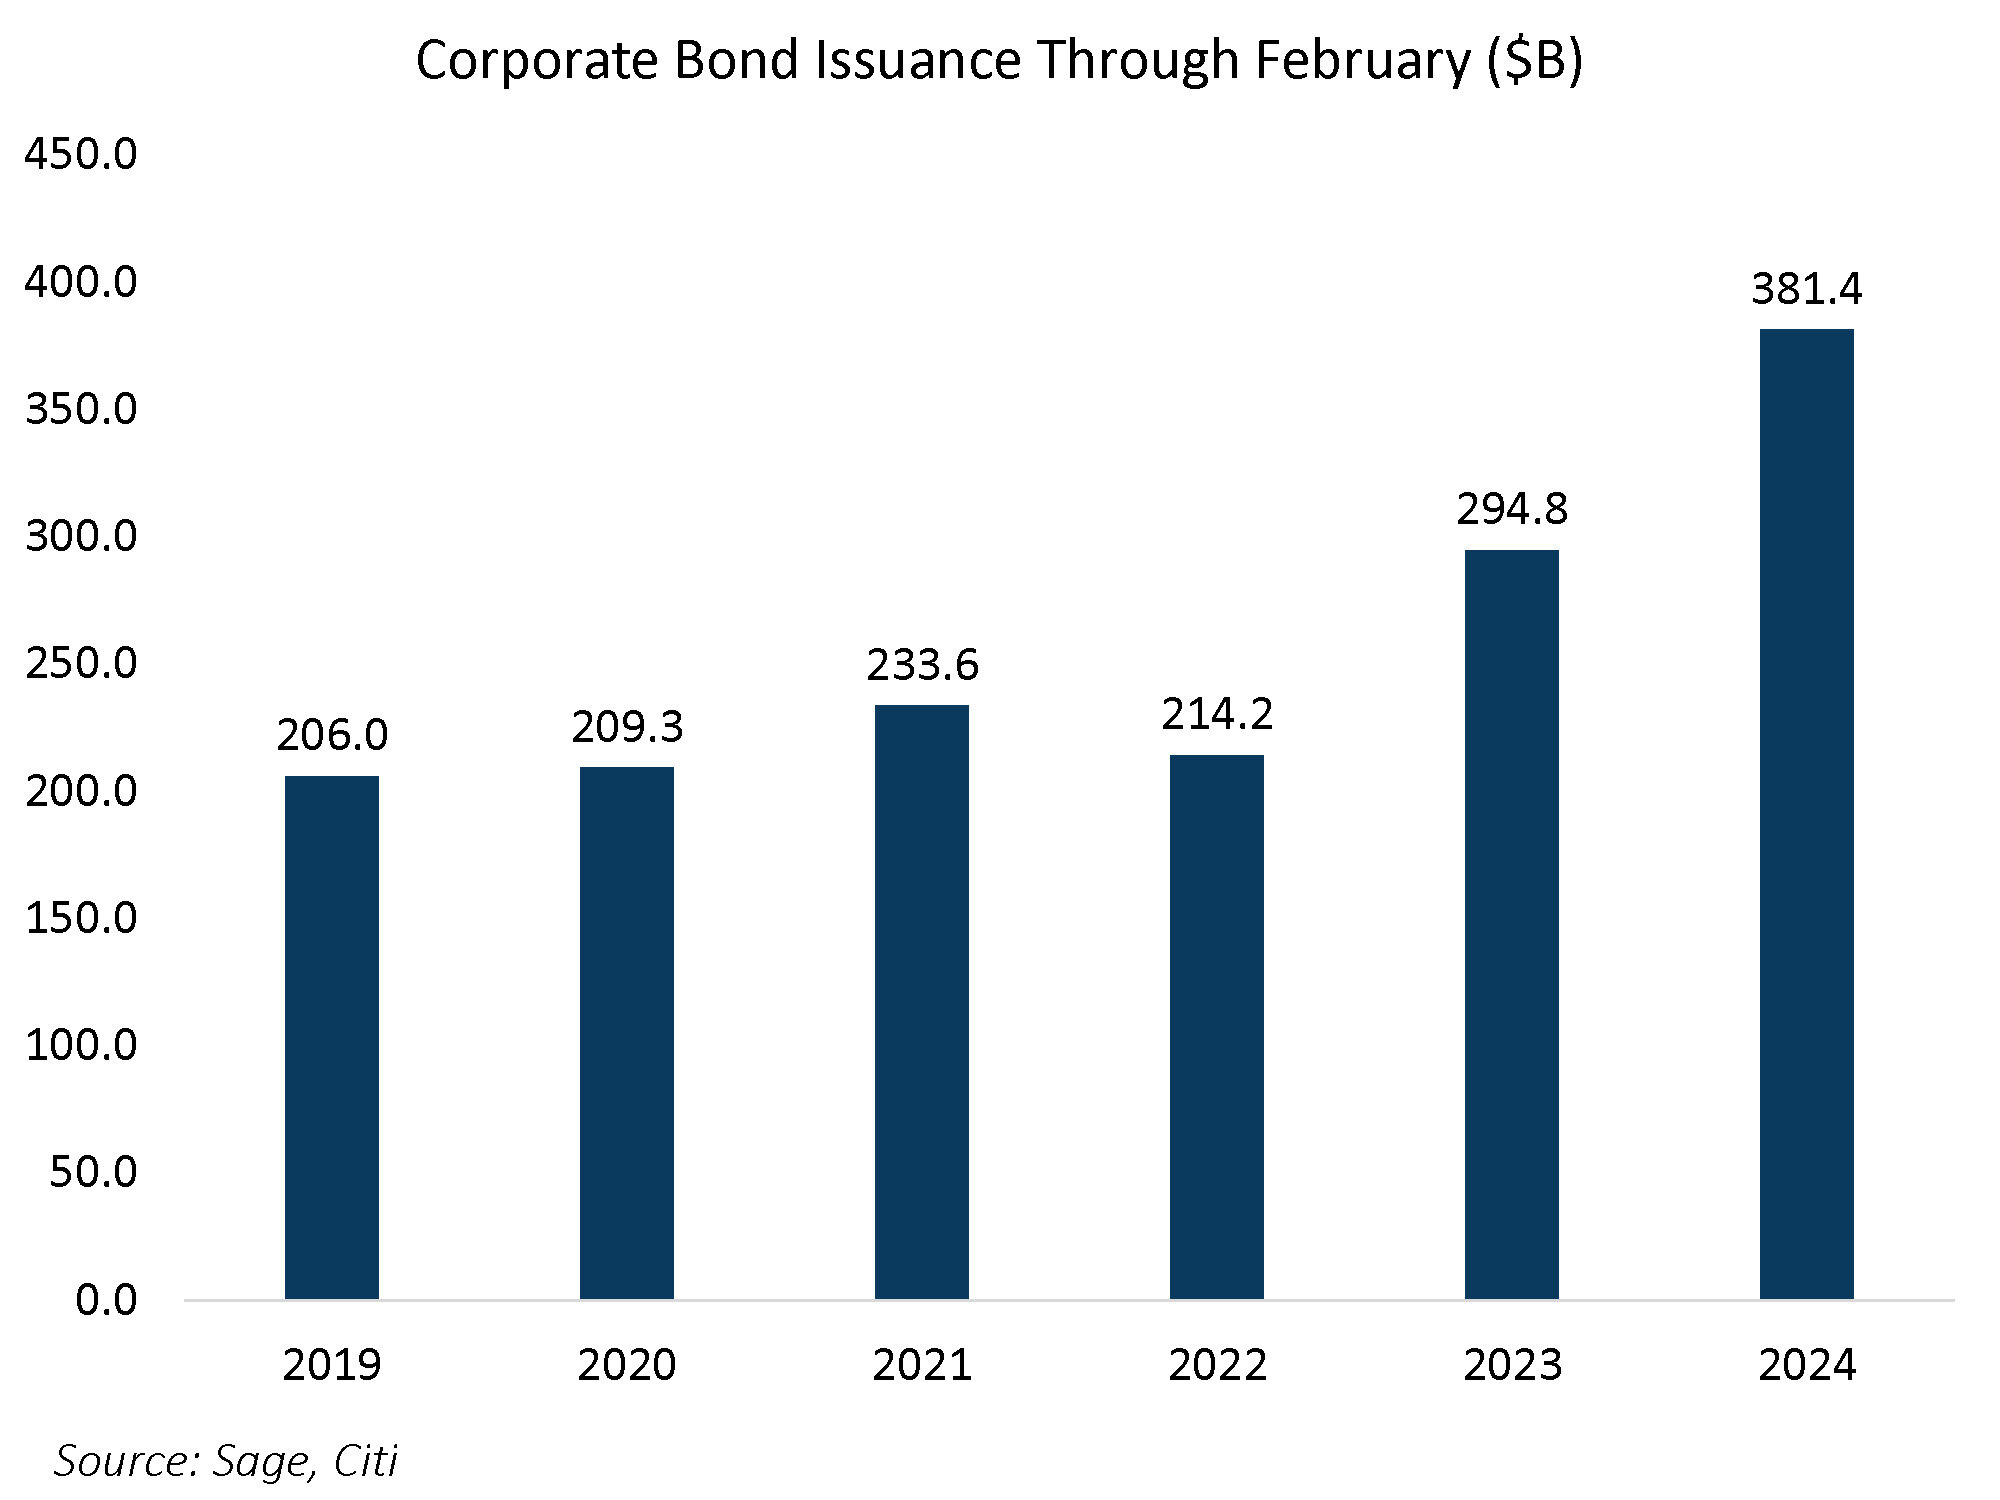 Corporate Bond Issuance Through February